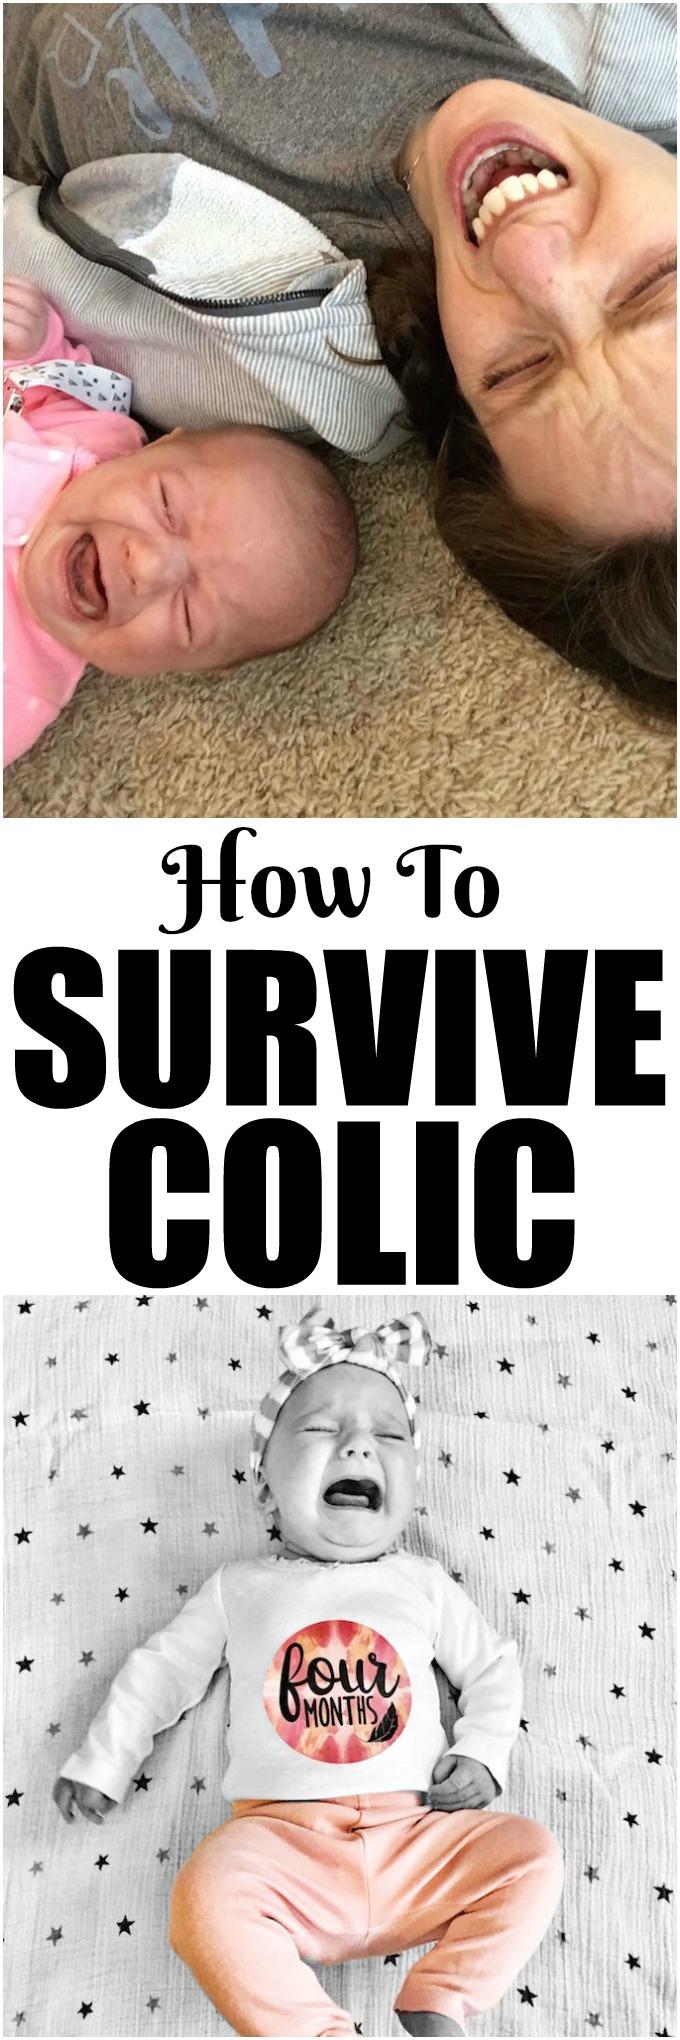 How To Survive Colic. My top five tips for new parents with a colicky baby.